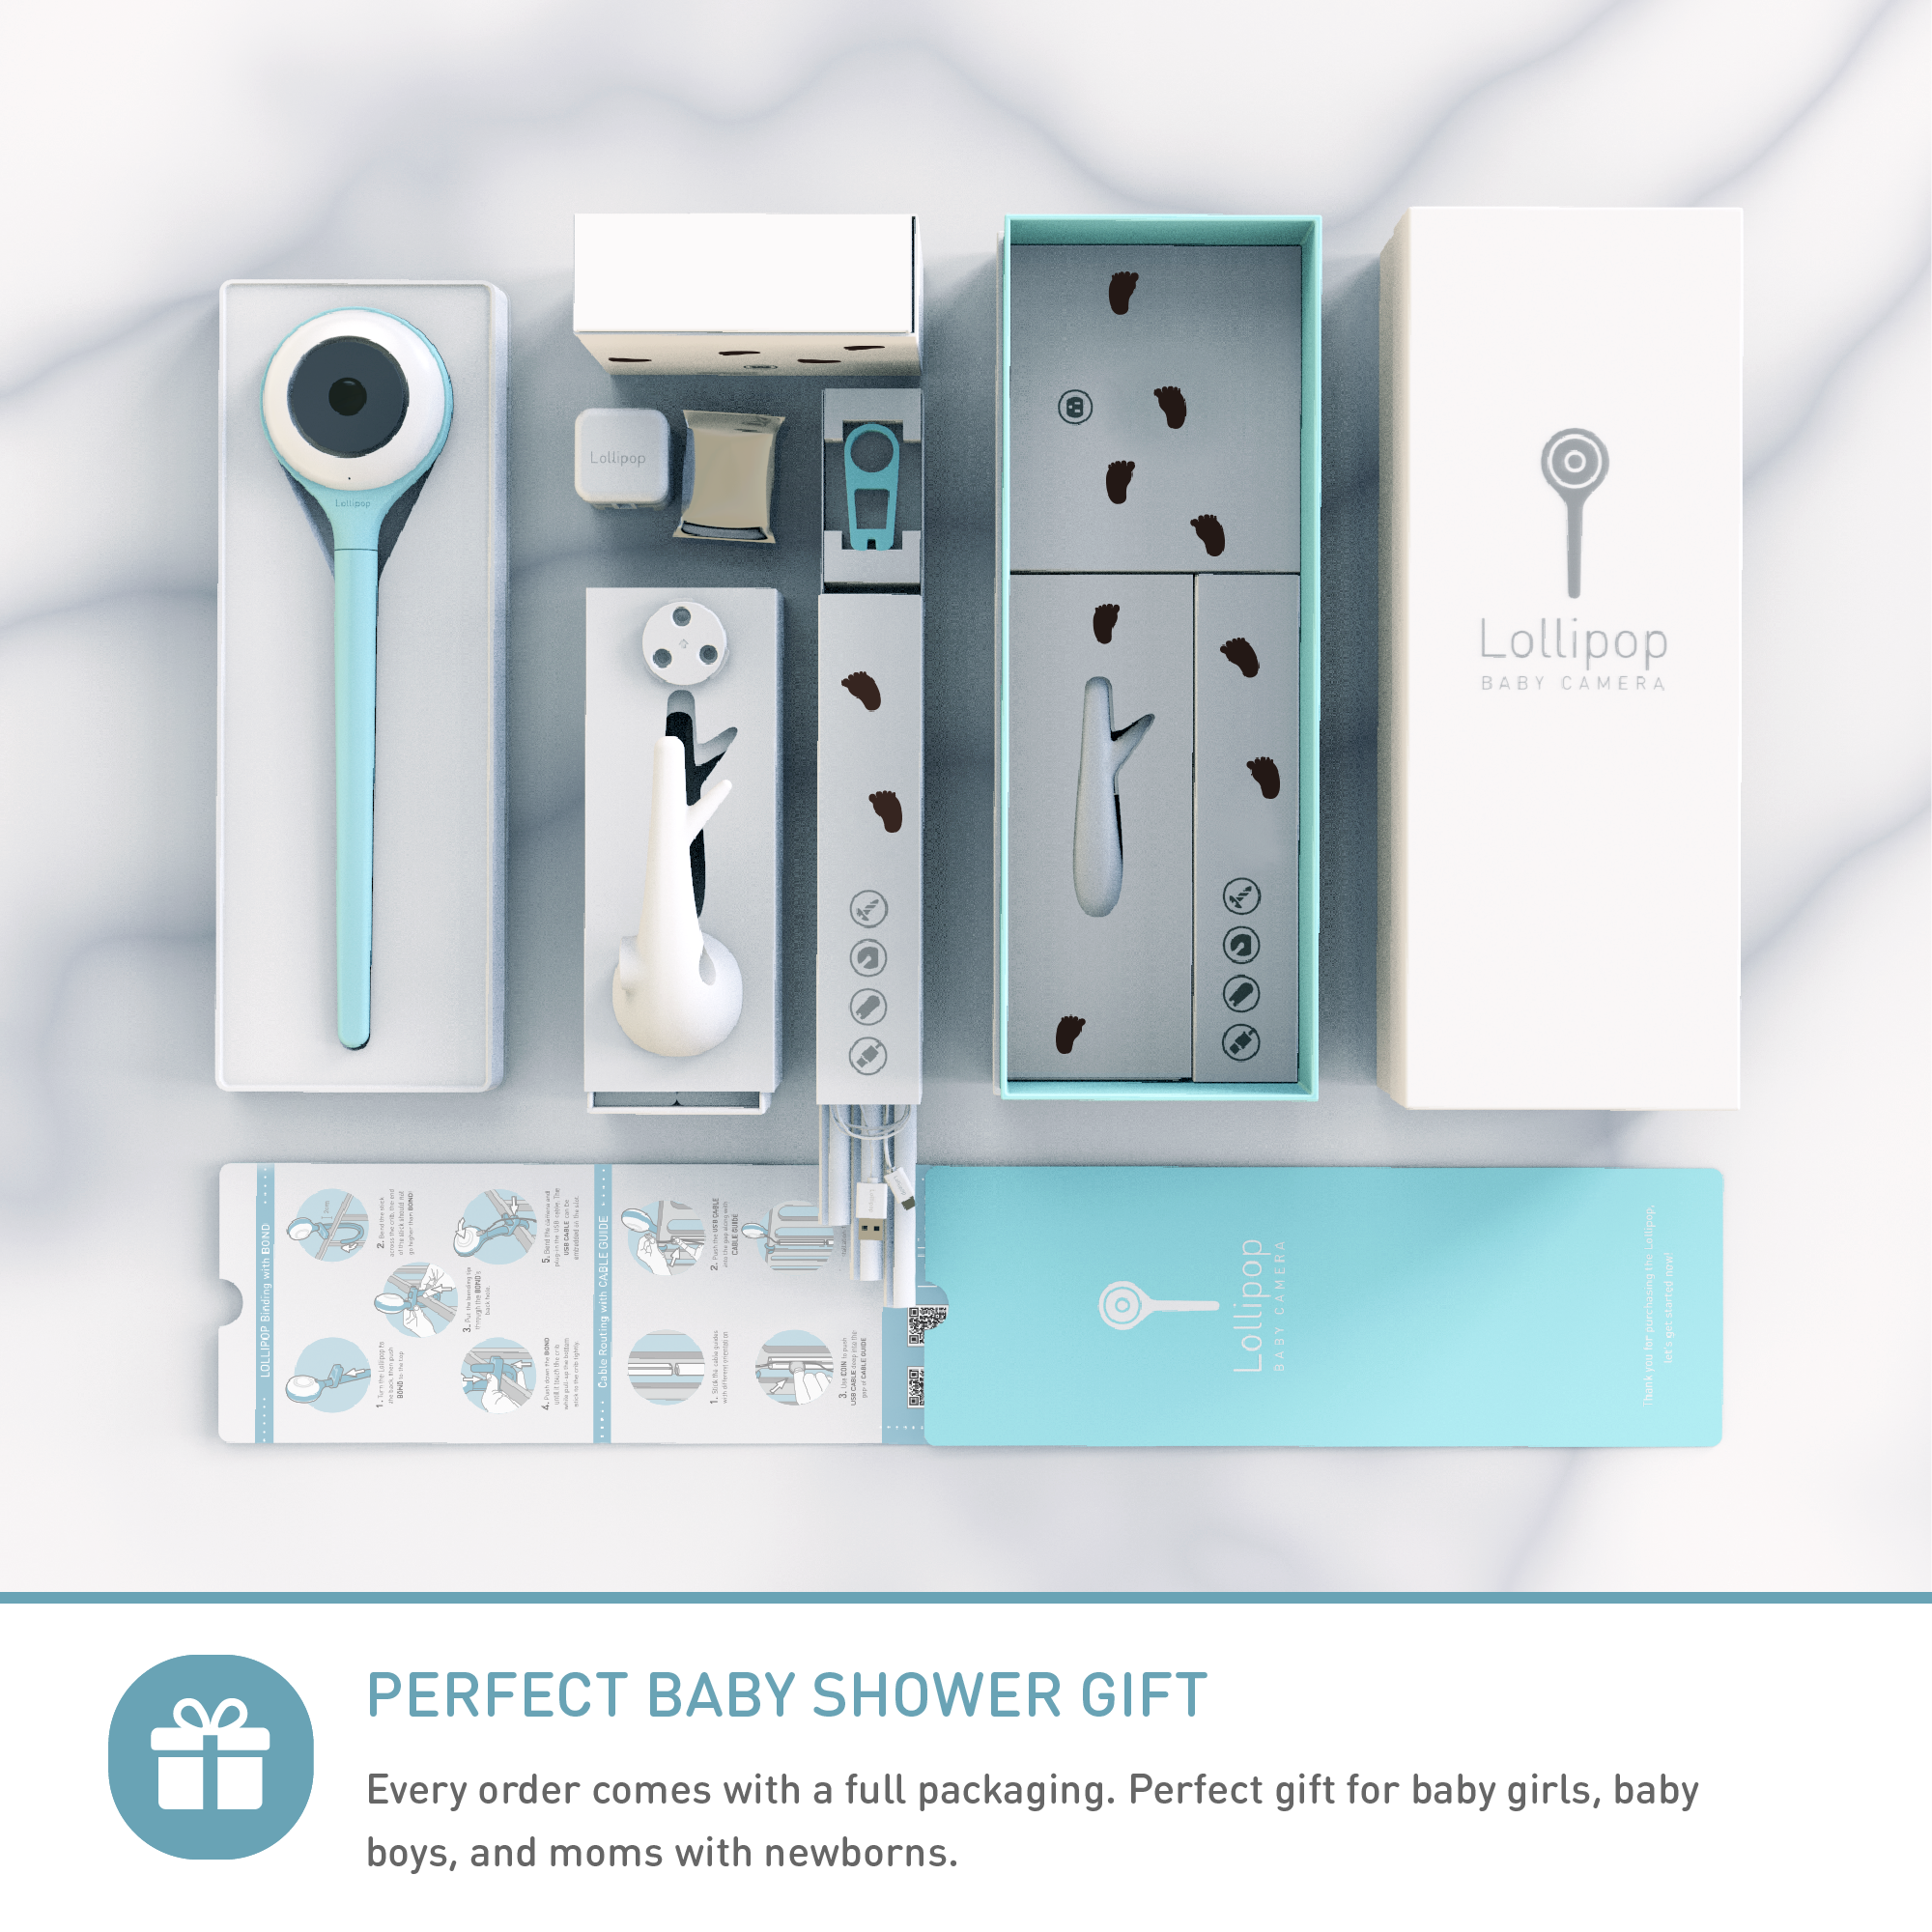 Lollipop Smart Baby Monitor A Revolutionary Baby Caring System